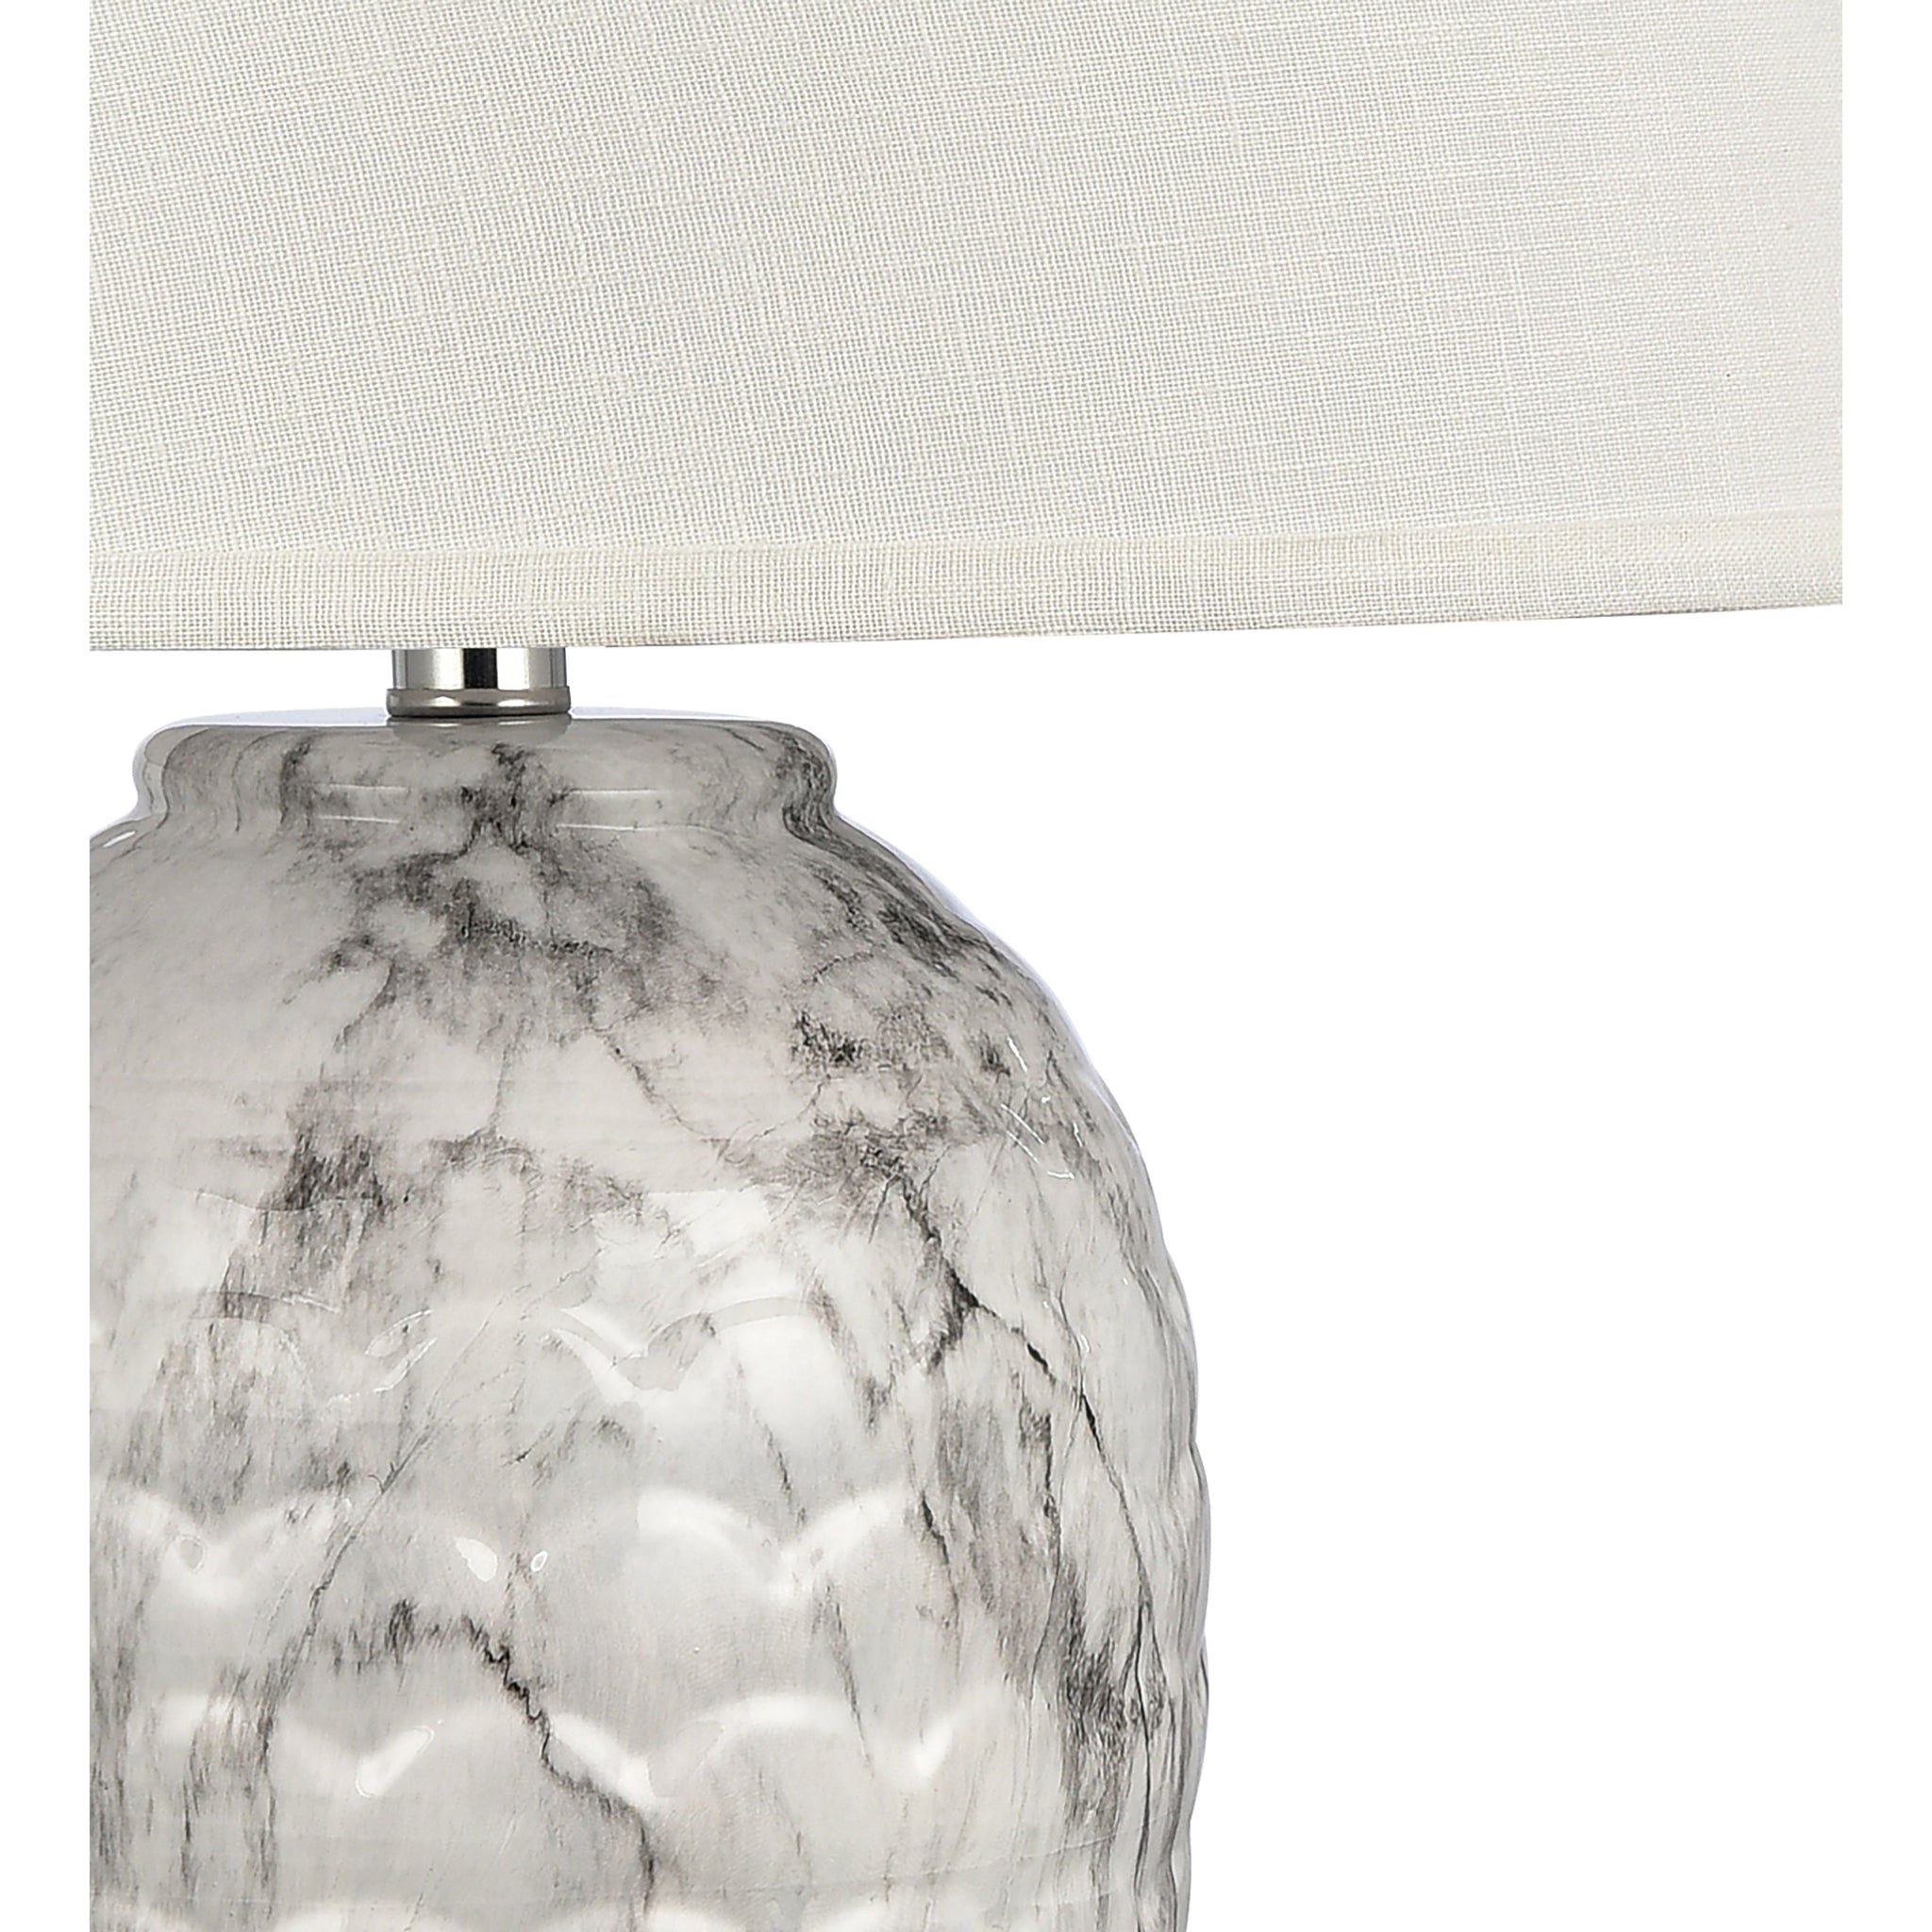 Causeway Waters 31" High 1-Light Table Lamp